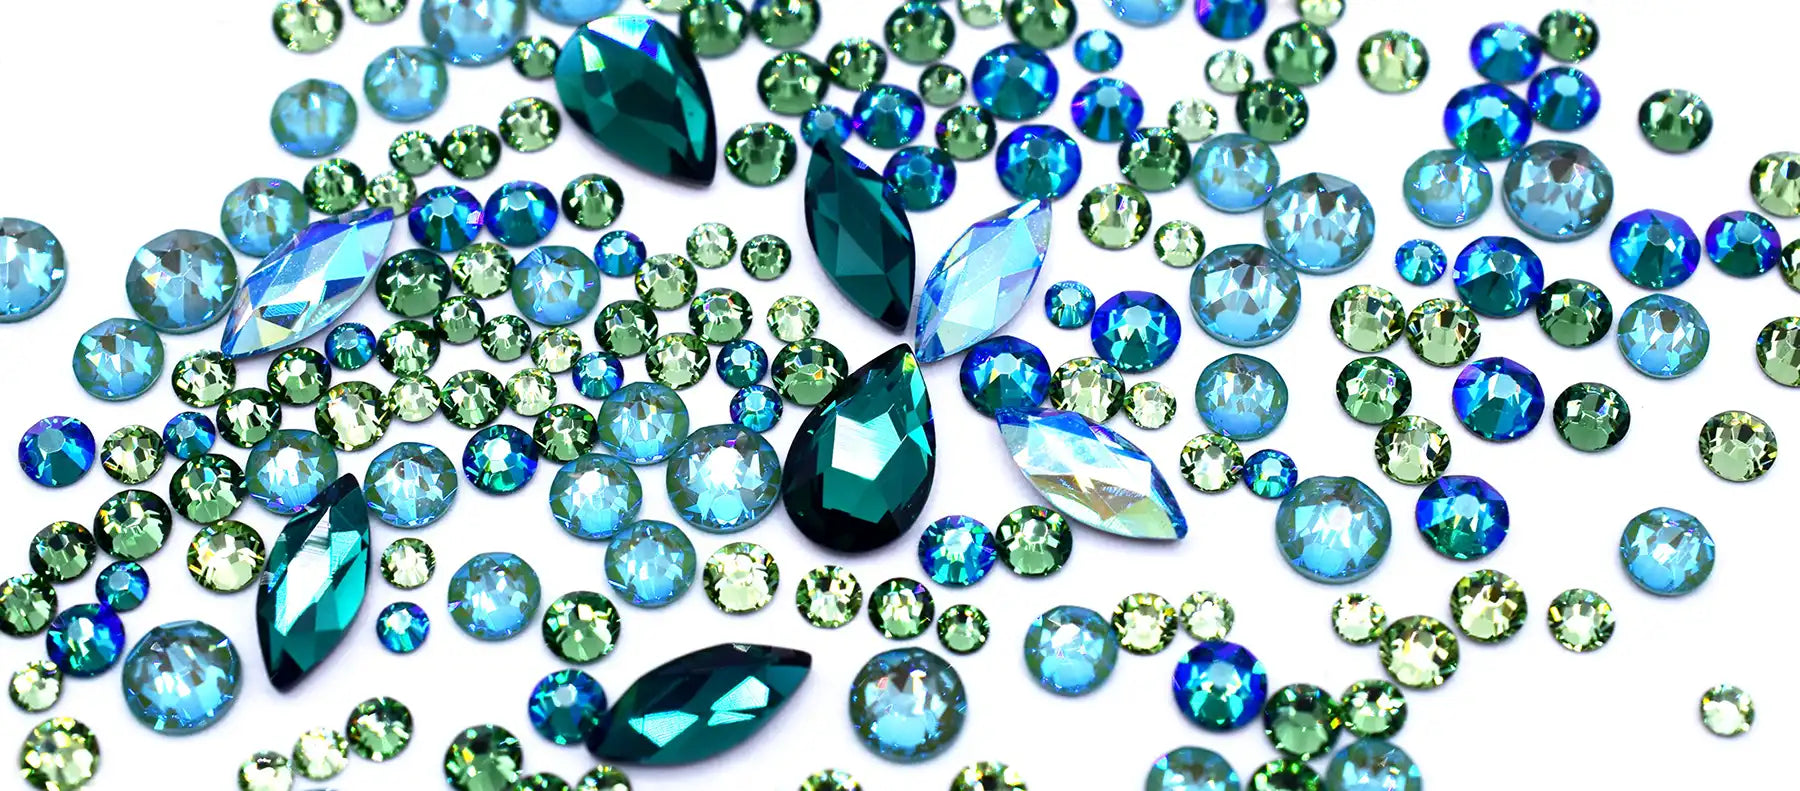 Bluestreak Crystals is the world's Leading Supplier of High-Quality Crystals